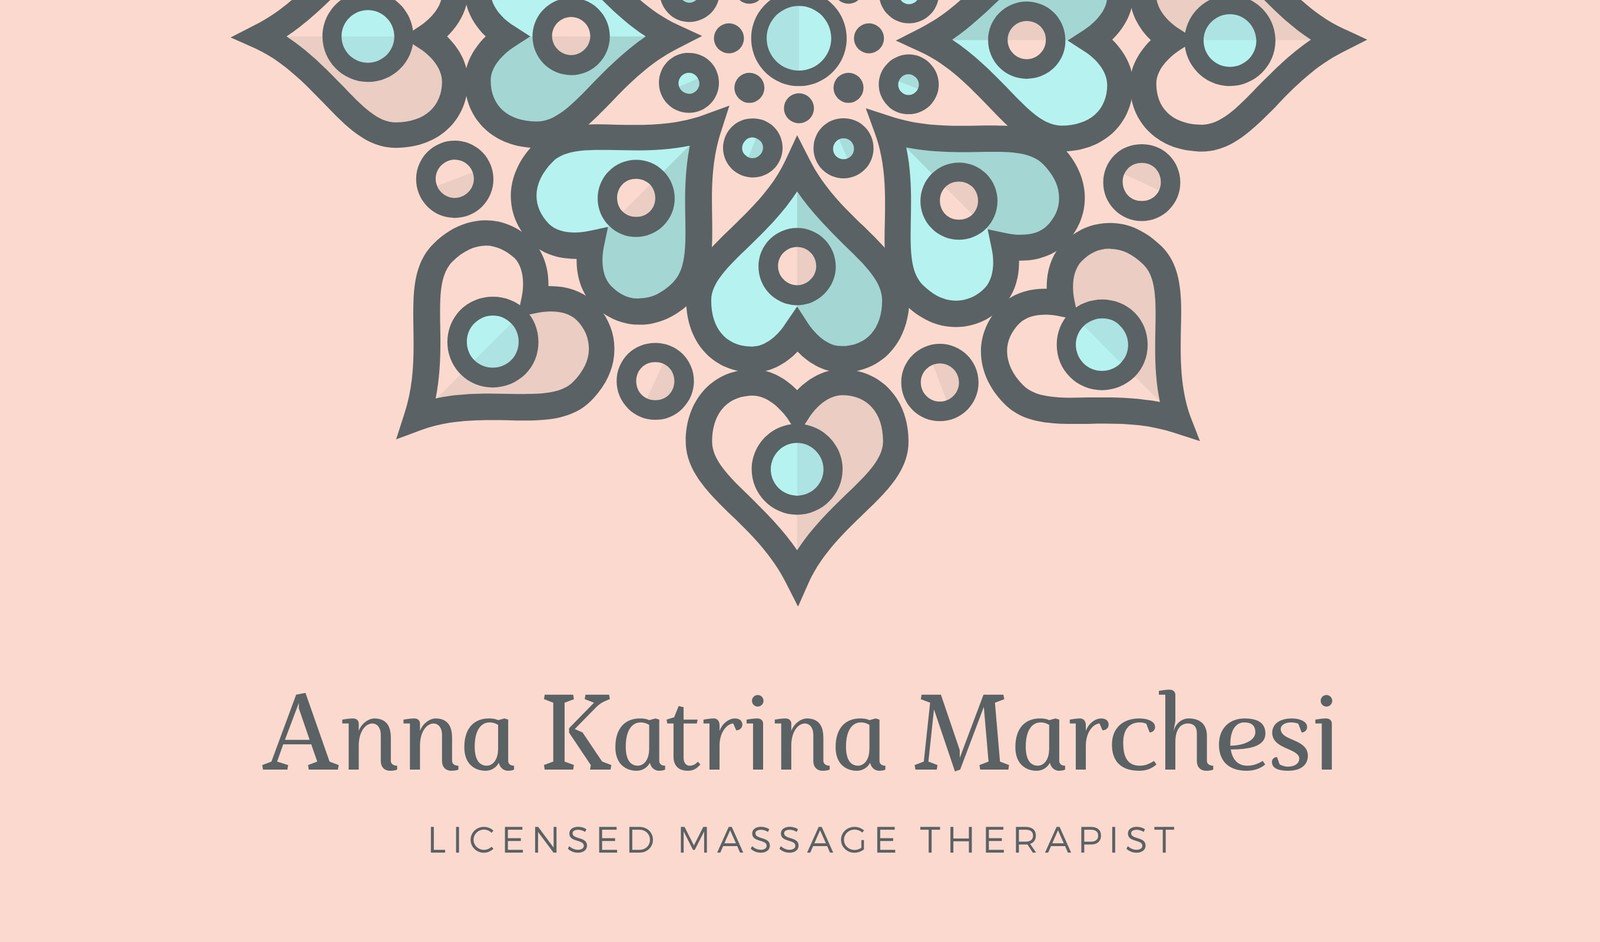 Free printable massage therapist business card templates  Canva Intended For Massage Therapy Business Card Templates